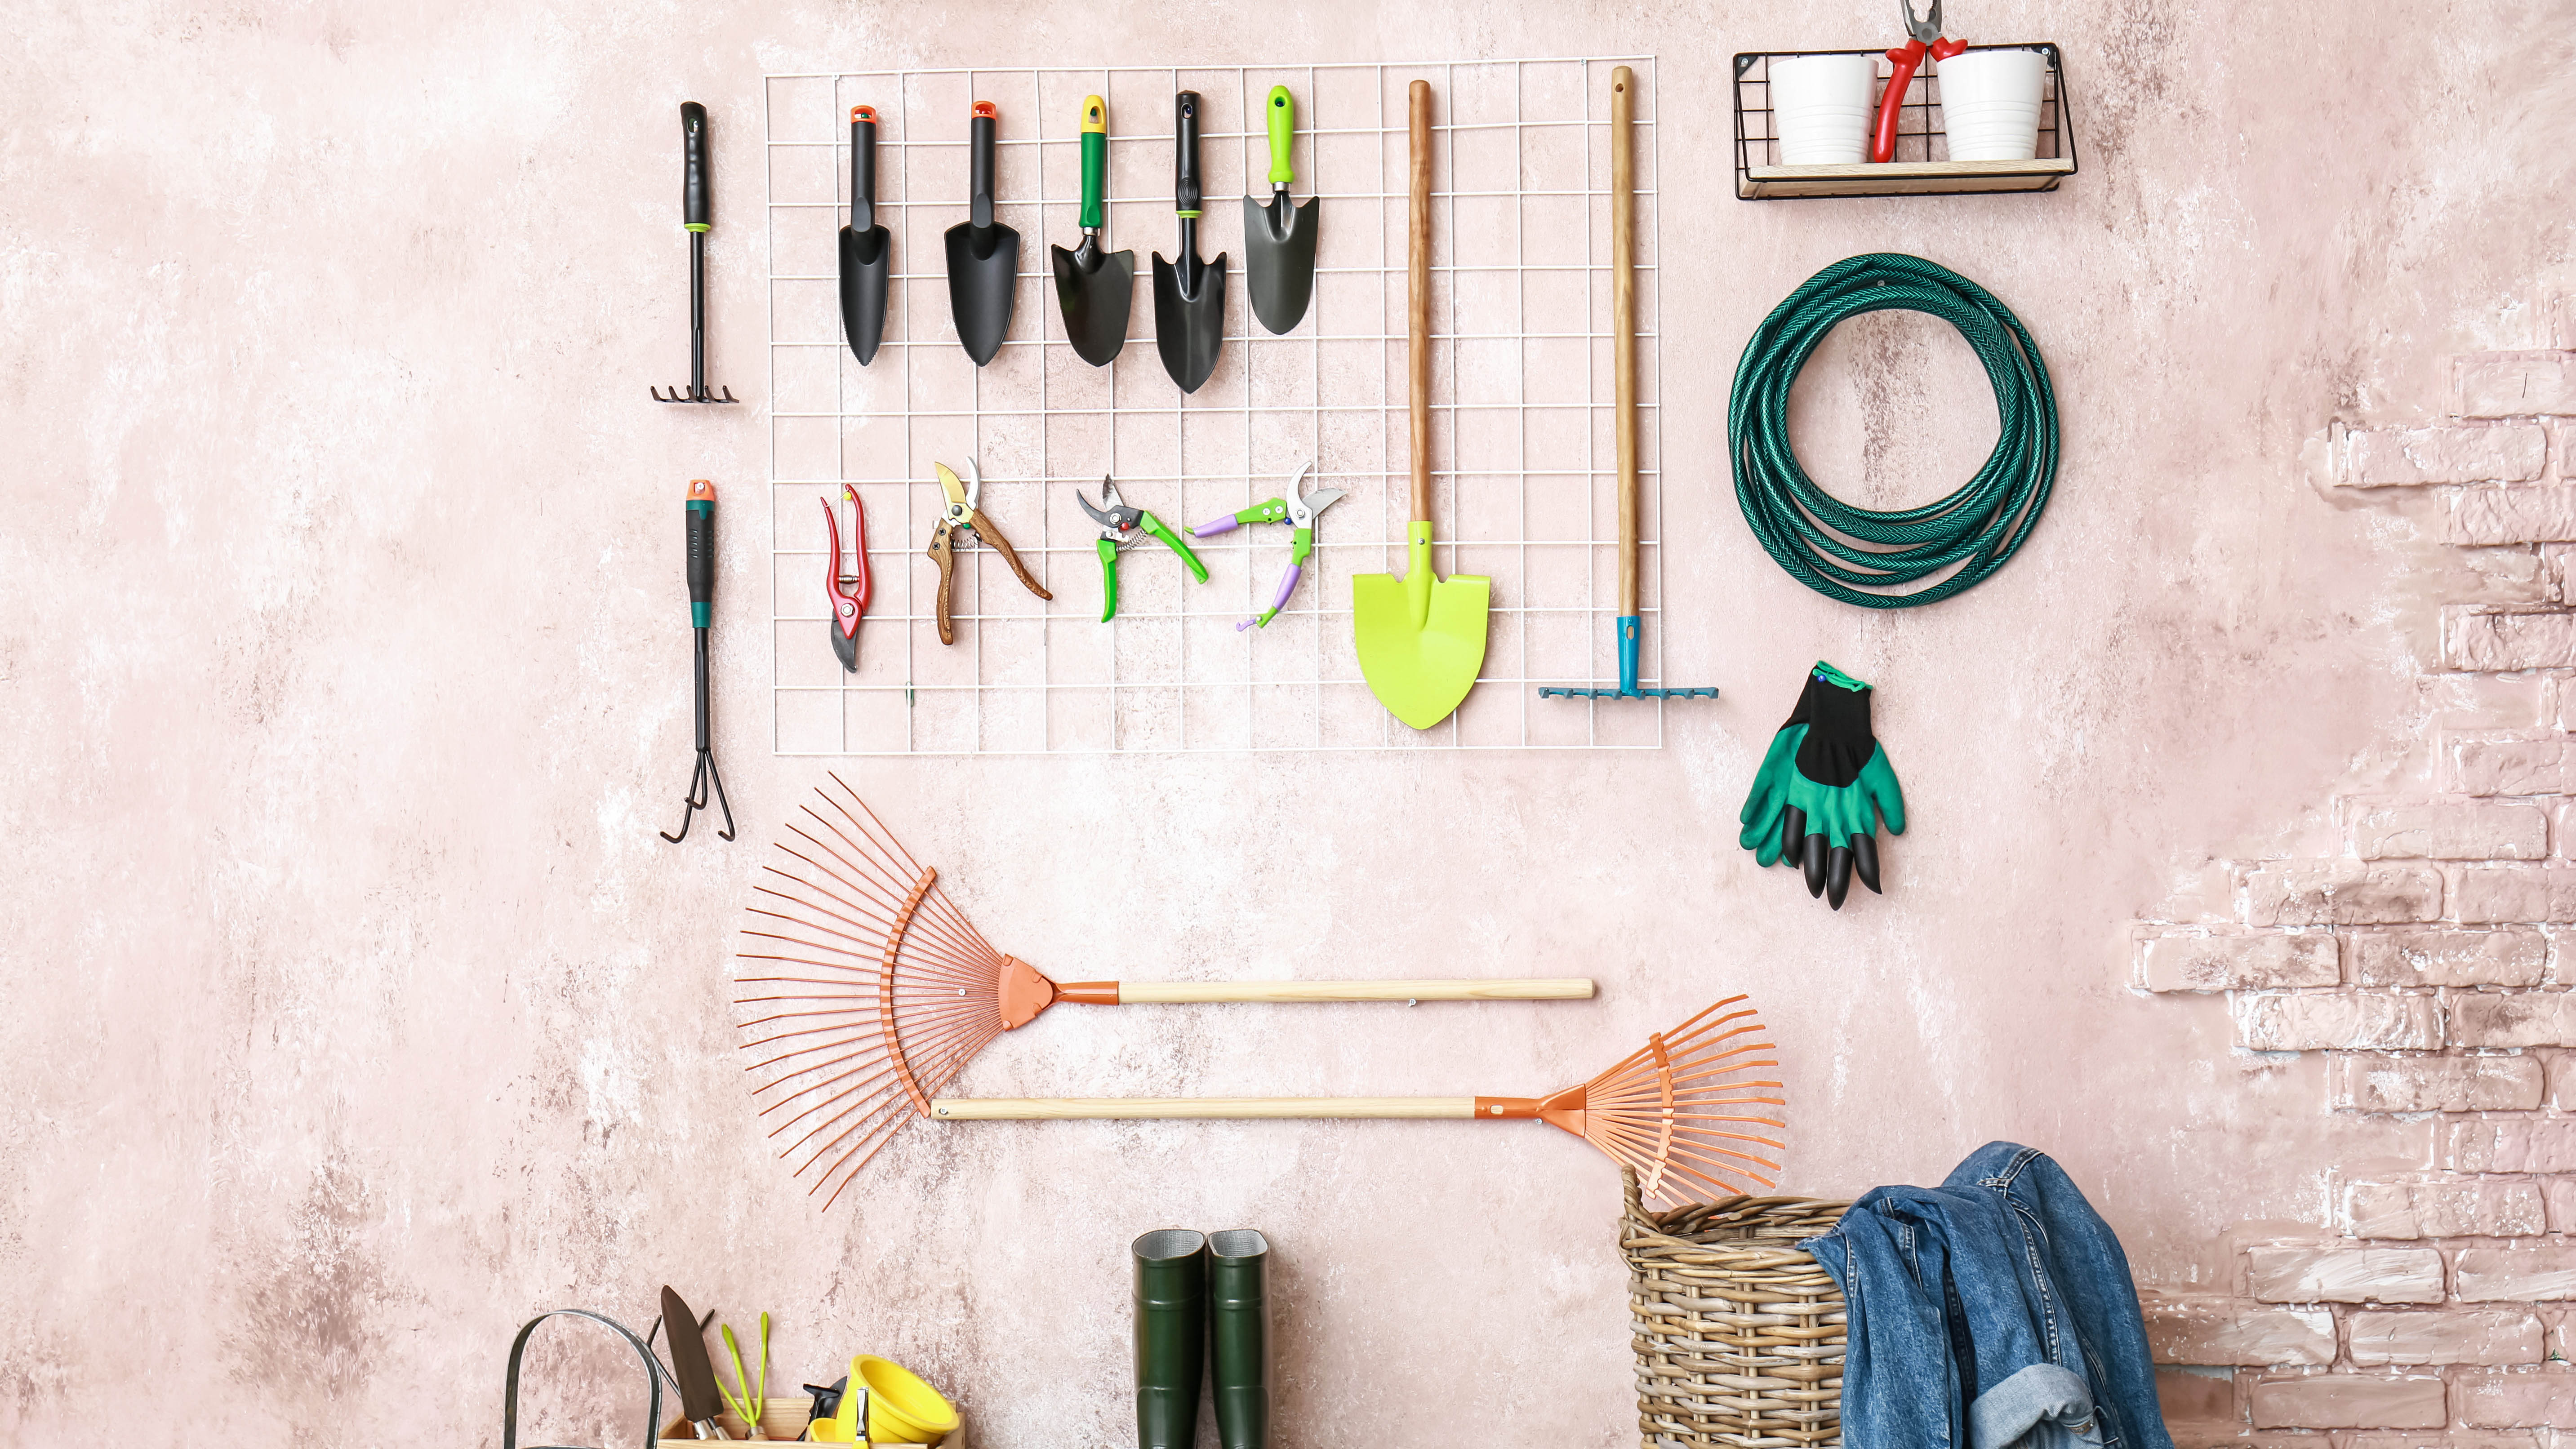 7 Ideas for Garden Tool Storage and Organization - The Home Depot